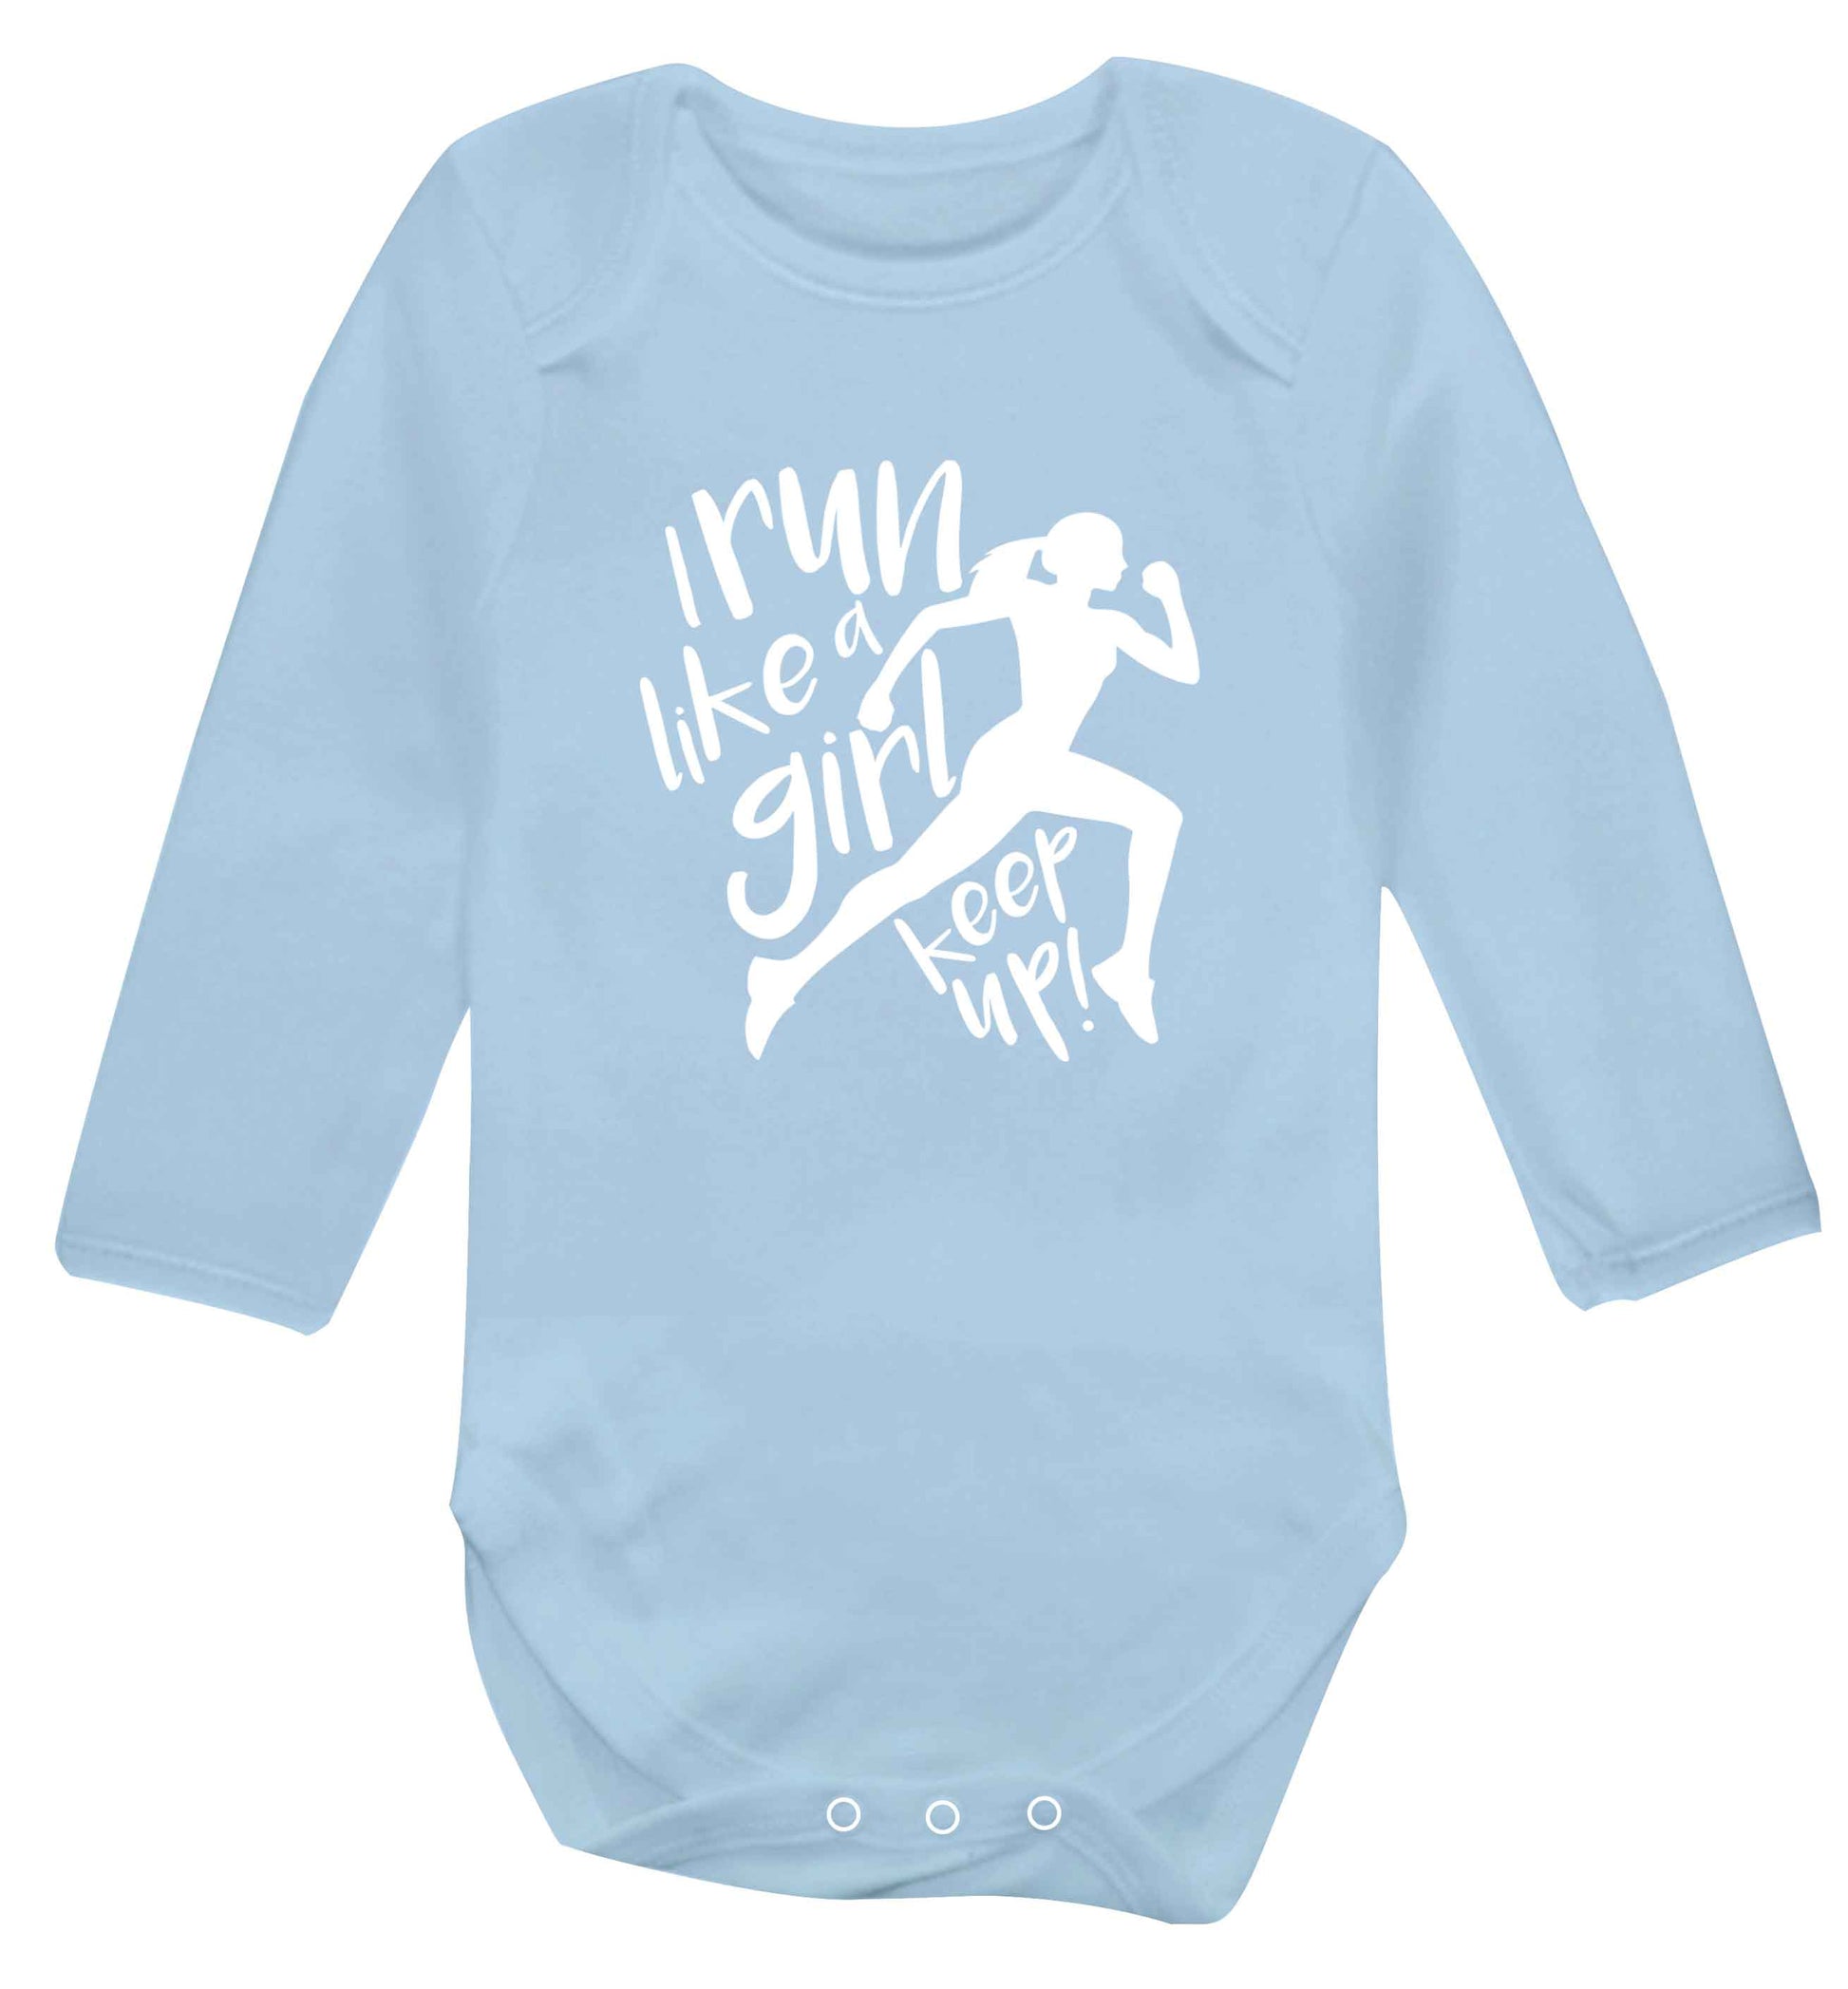 I run like a girl, keep up! baby vest long sleeved pale blue 6-12 months